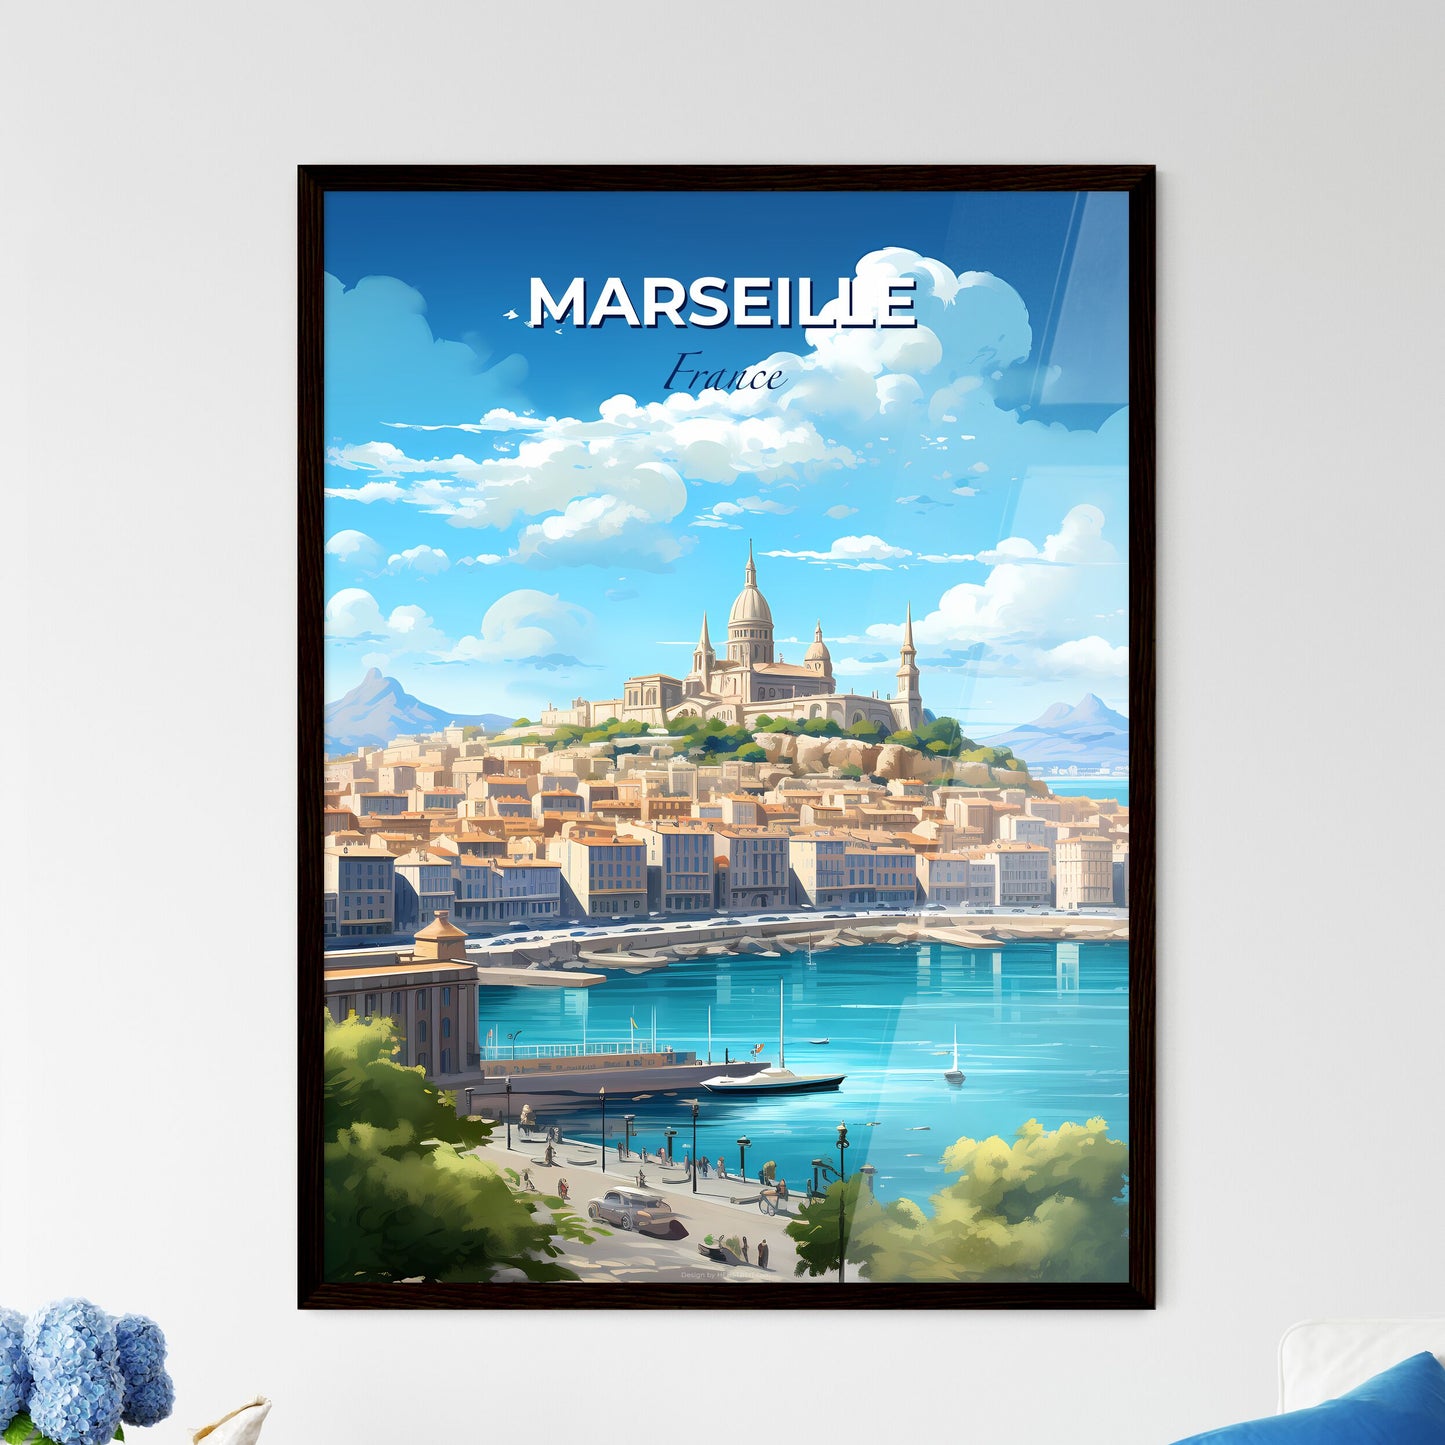 Marseille France Skyline - A City With A Castle On A Hill And A Body Of Water - Customizable Travel Gift Default Title